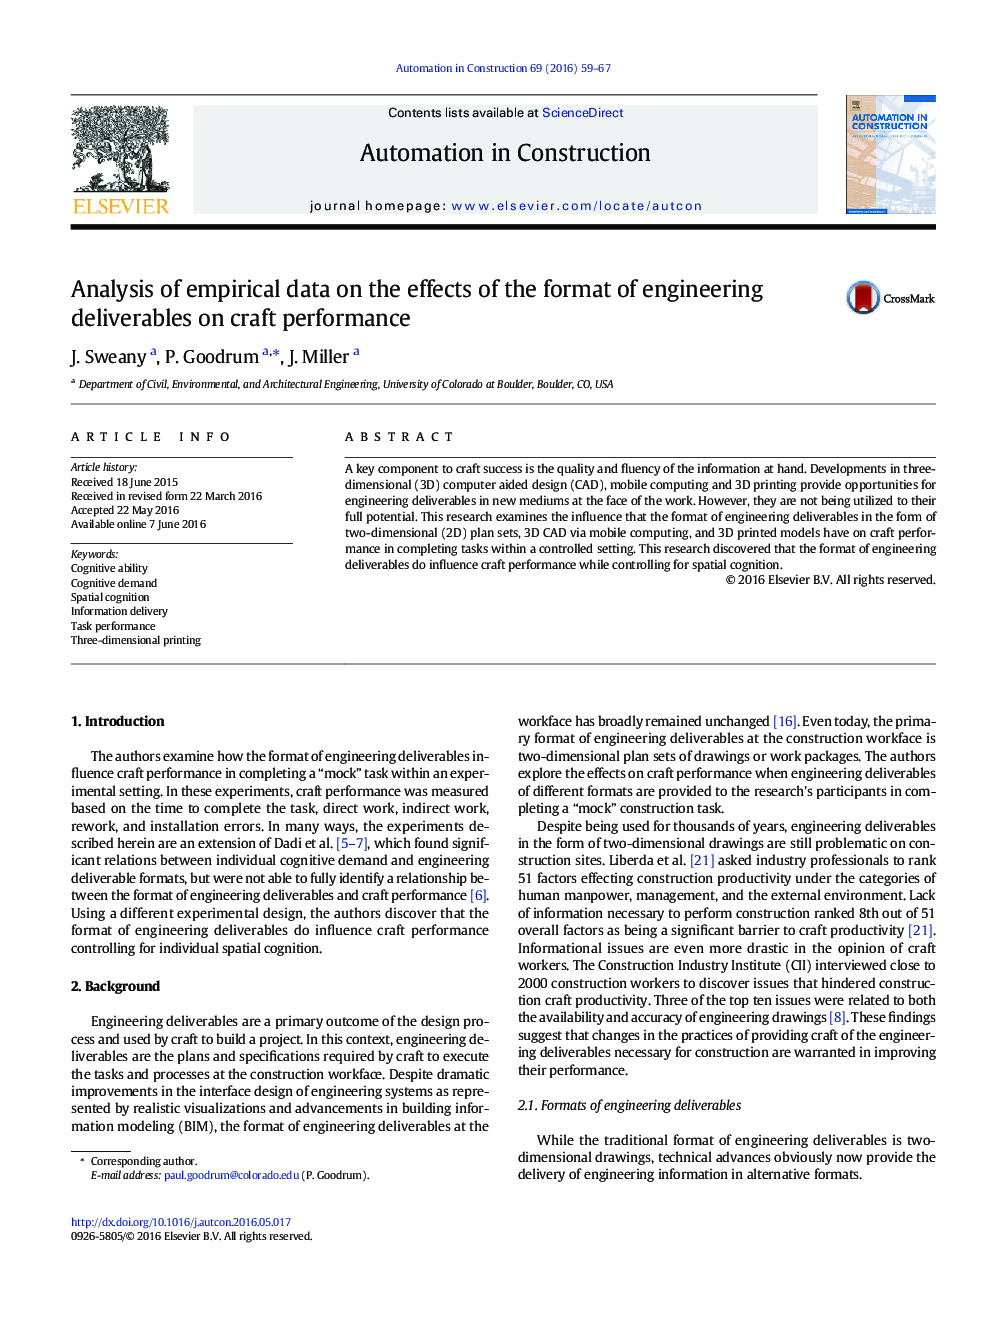 Analysis of empirical data on the effects of the format of engineering deliverables on craft performance